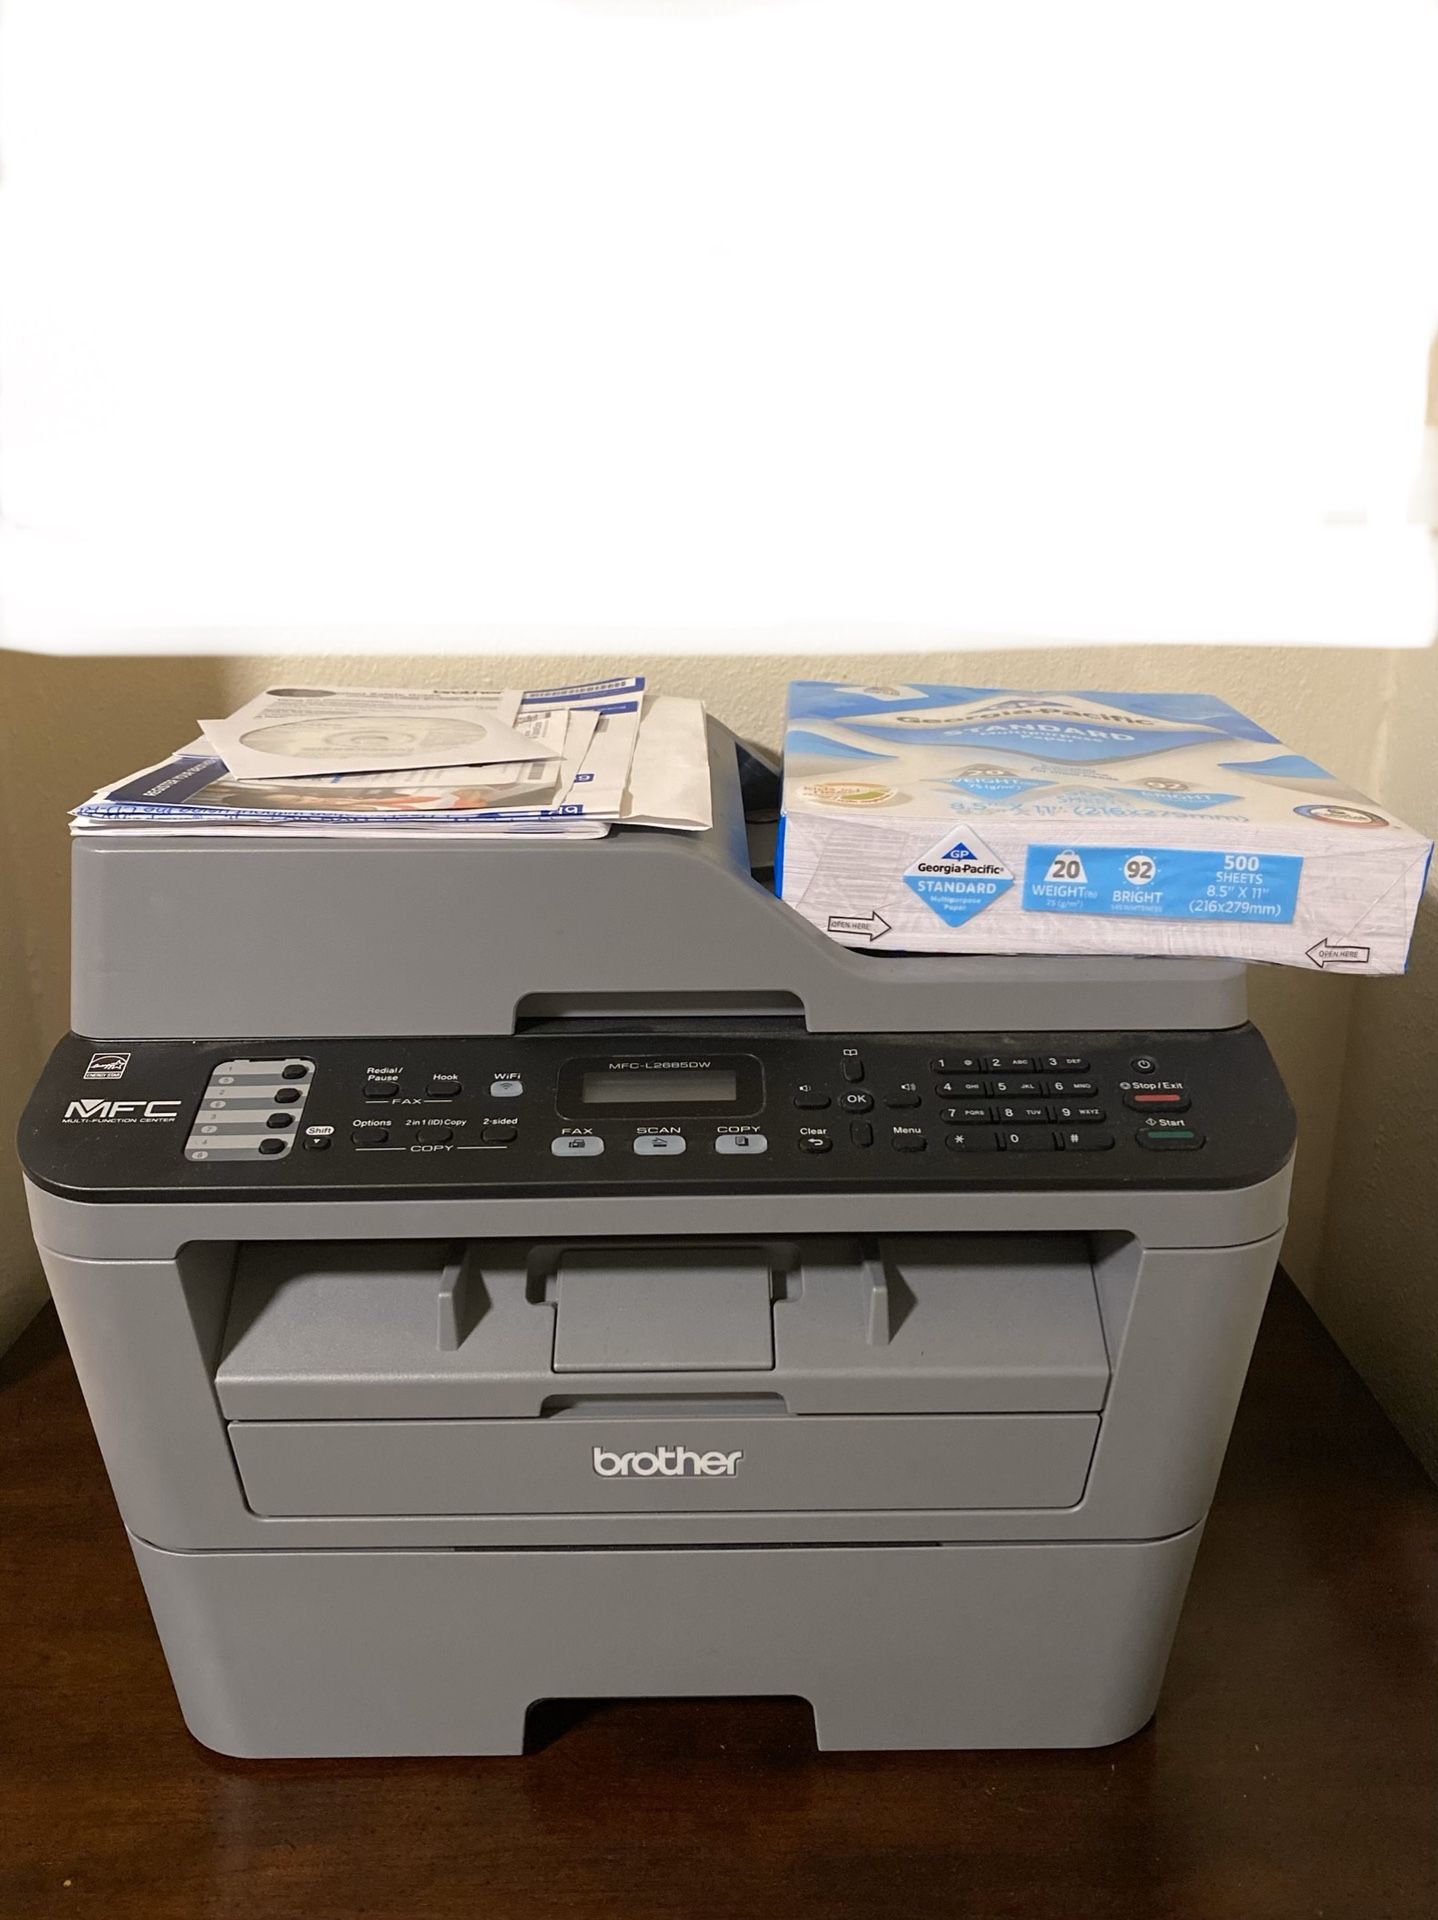 Brand new Brothers printer fax and scanner with paper